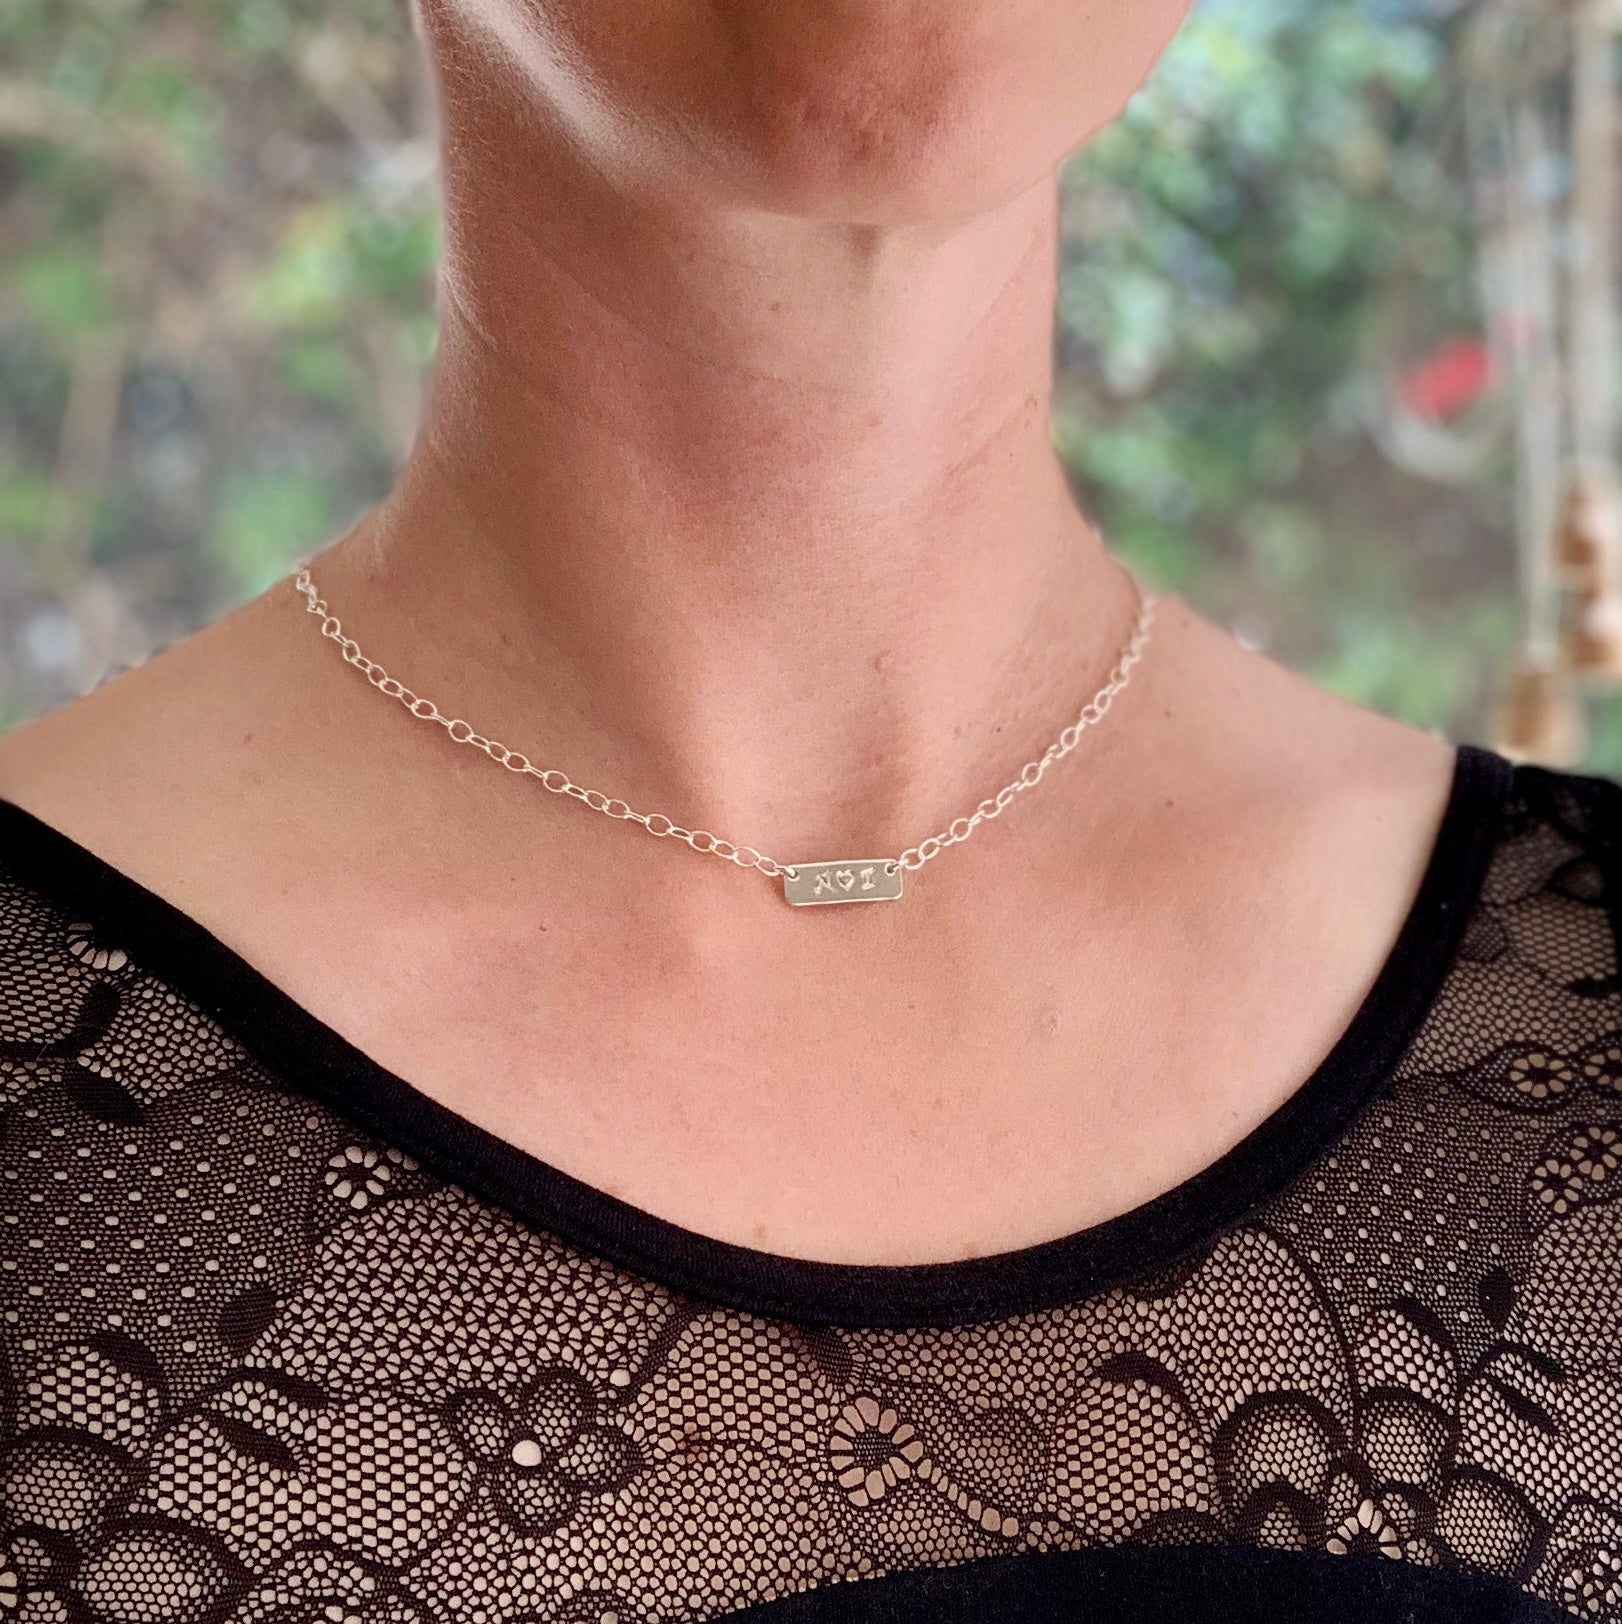 Personalized sterling silver tiny bar choker necklace with large